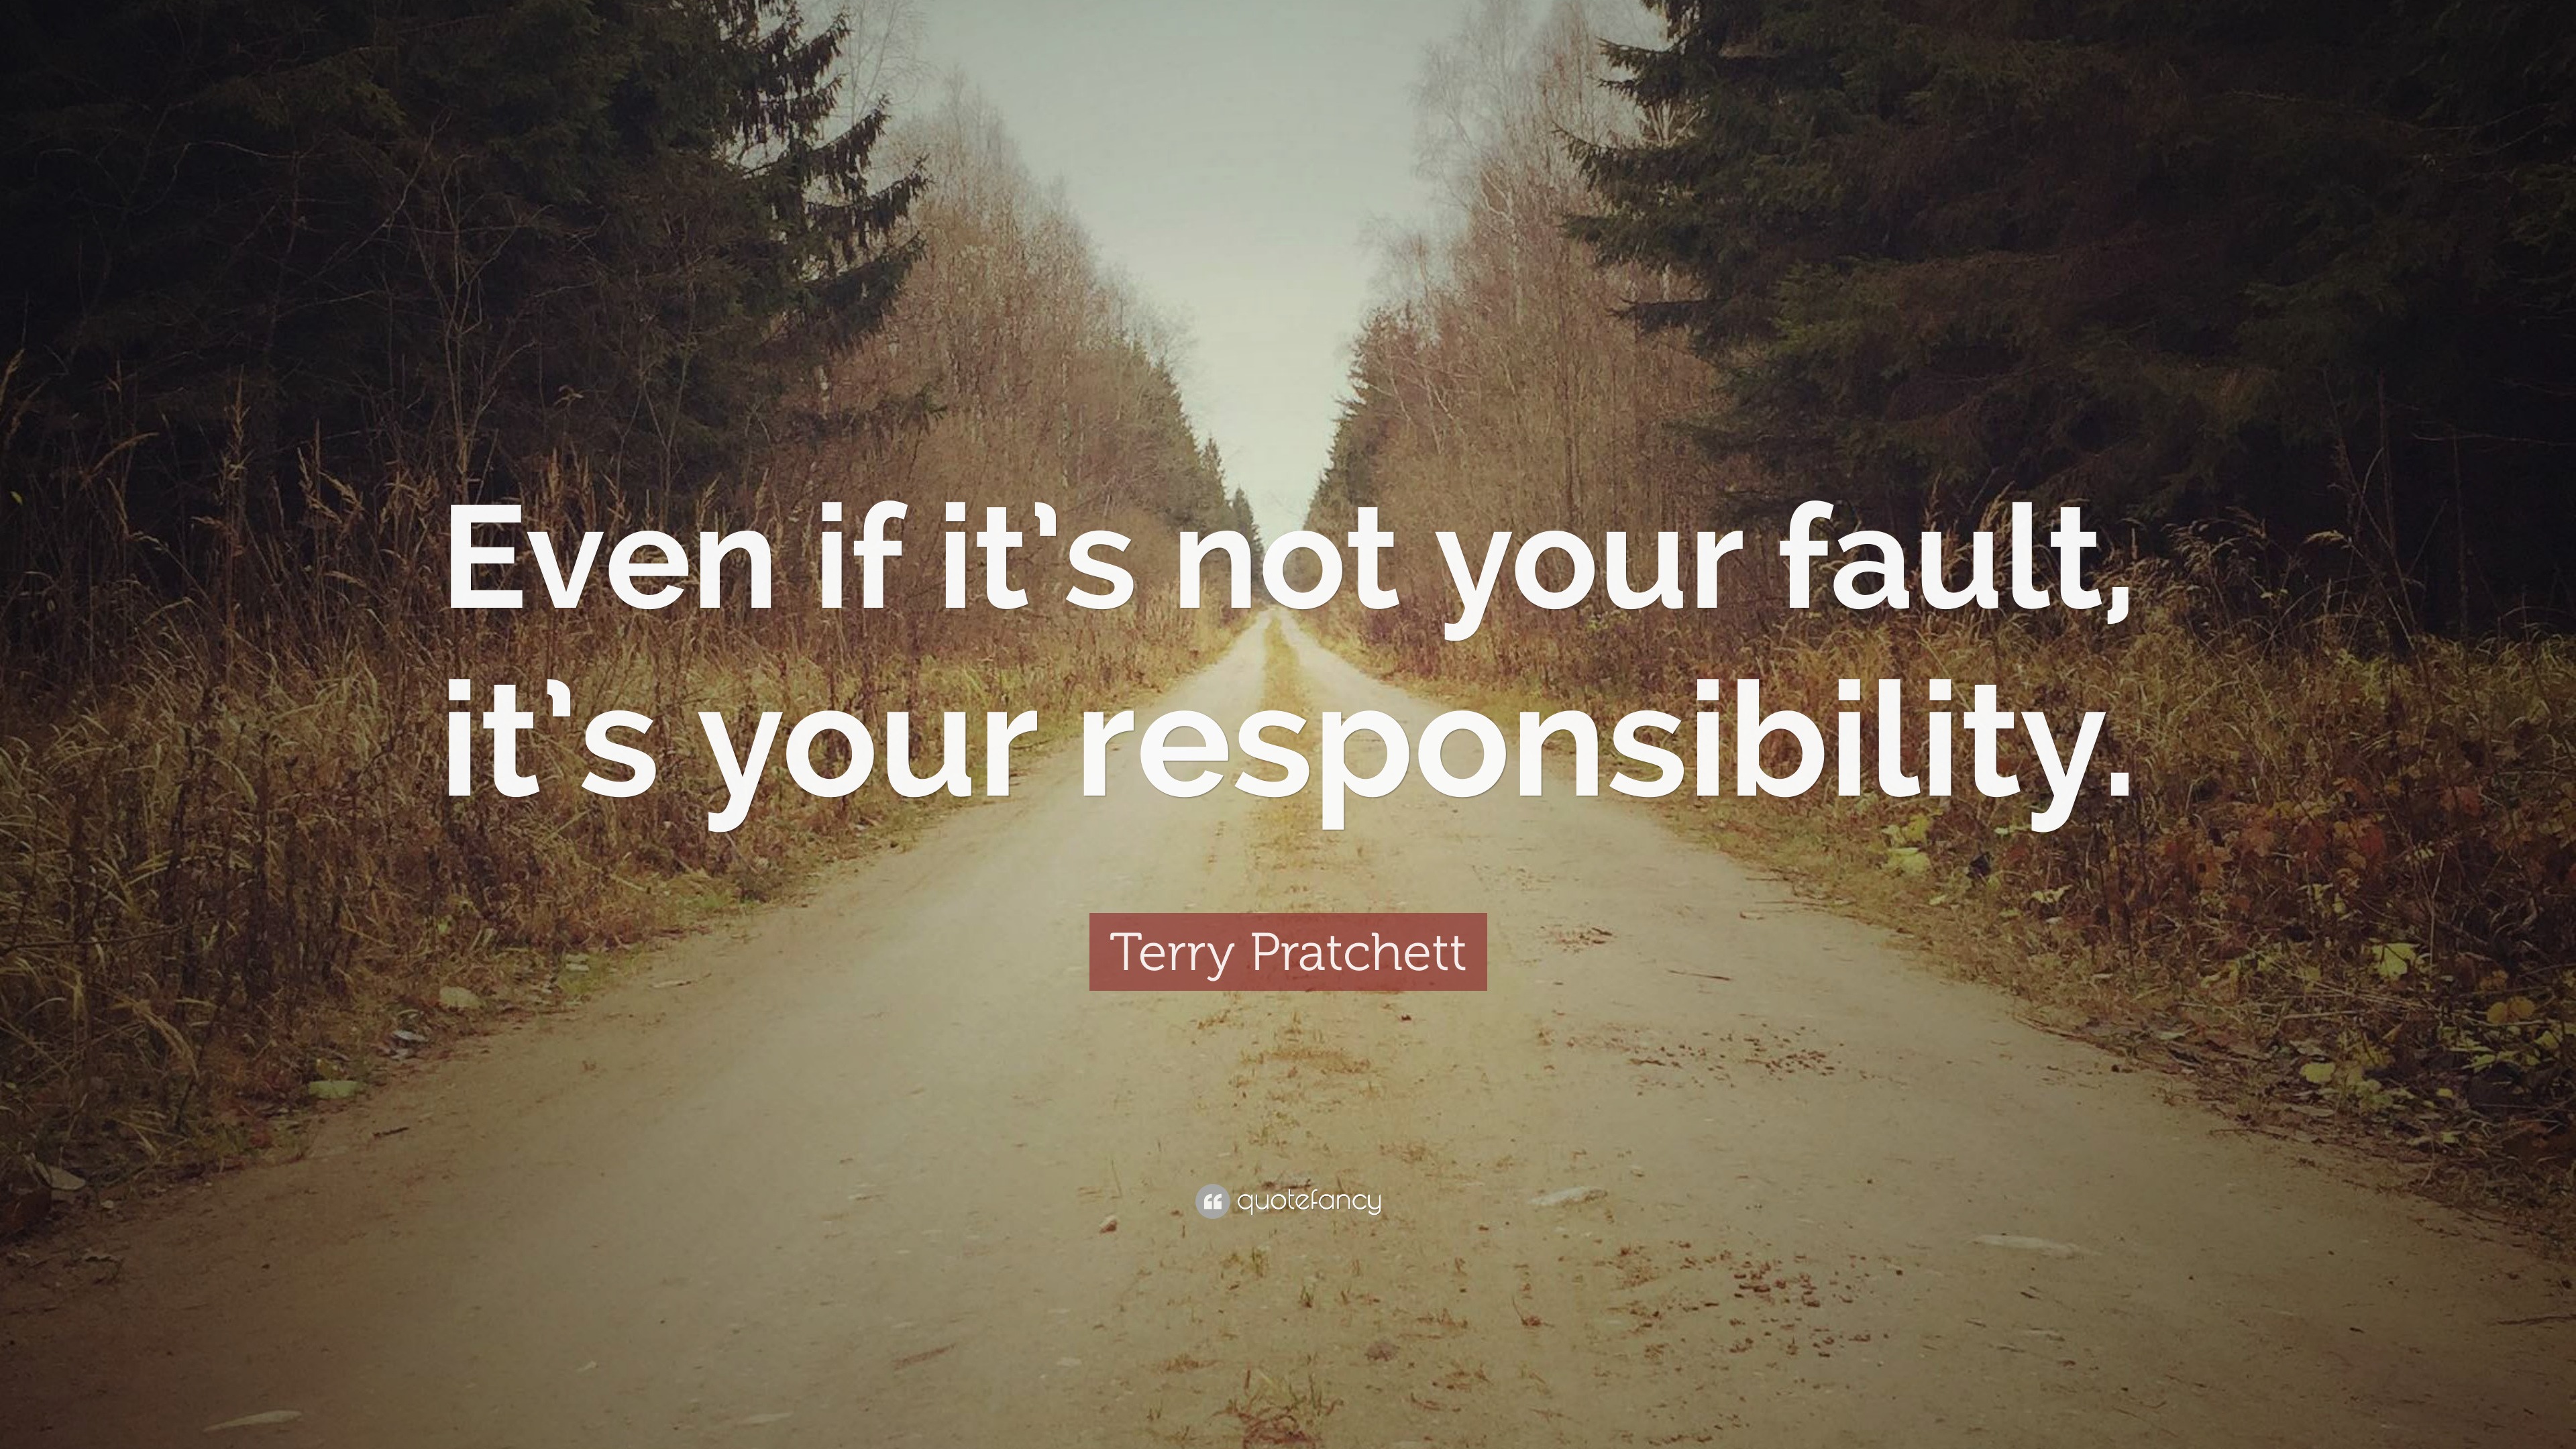 Terry Pratchett Quote “even If Its Not Your Fault Its Your Responsibility”